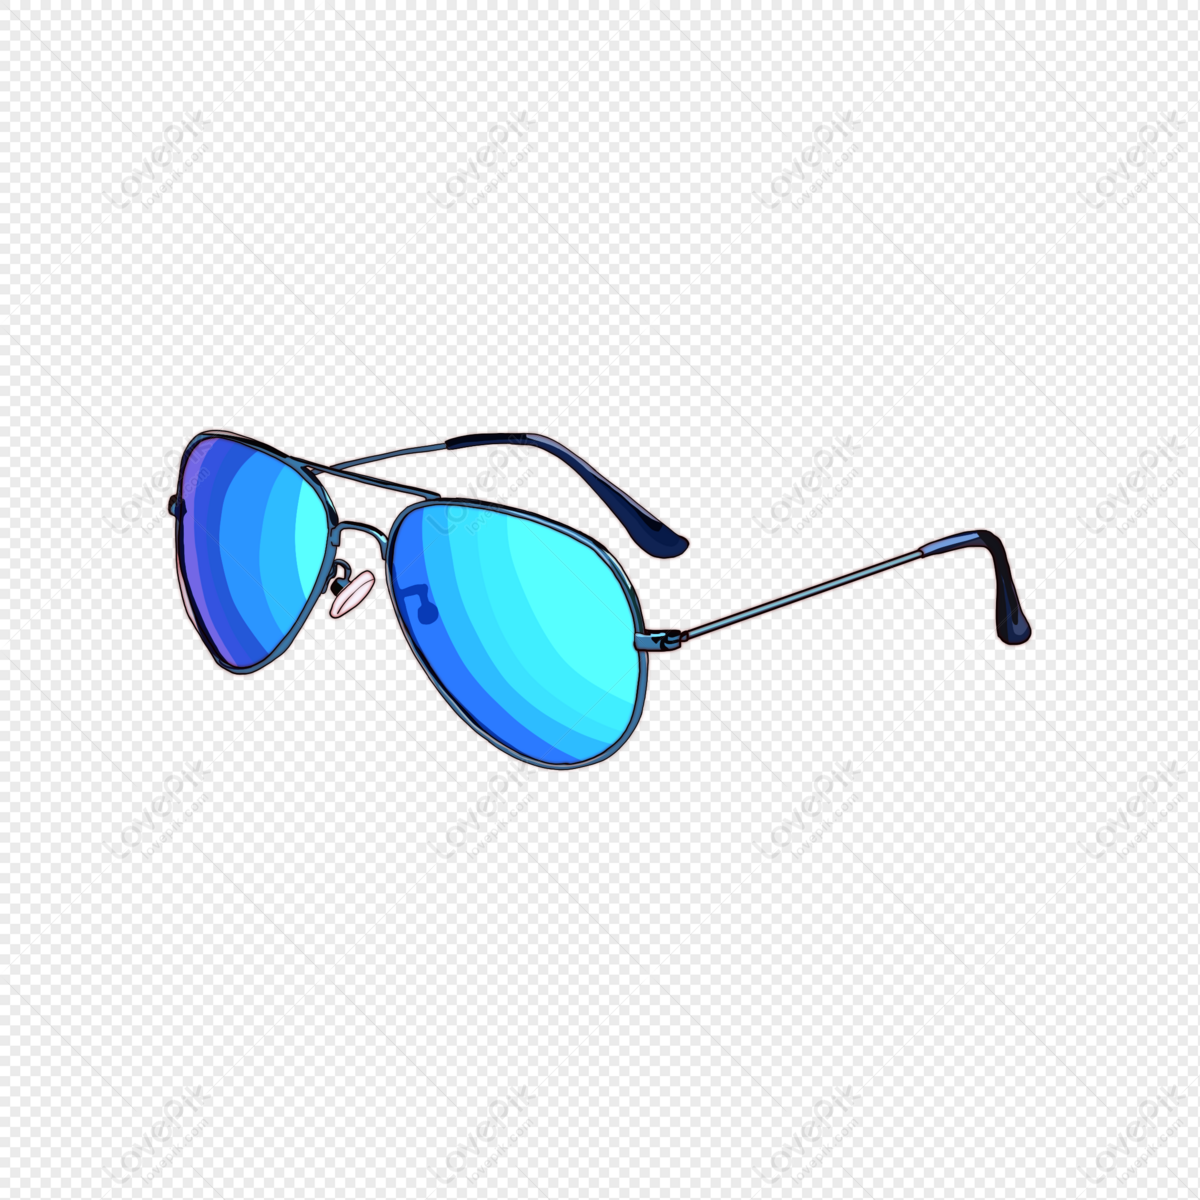 Free: Purple heart framed eyeglasses illustration, Aviator sunglasses ,  Purple Heart Sunglasses transparent background PNG clipart - nohat.cc